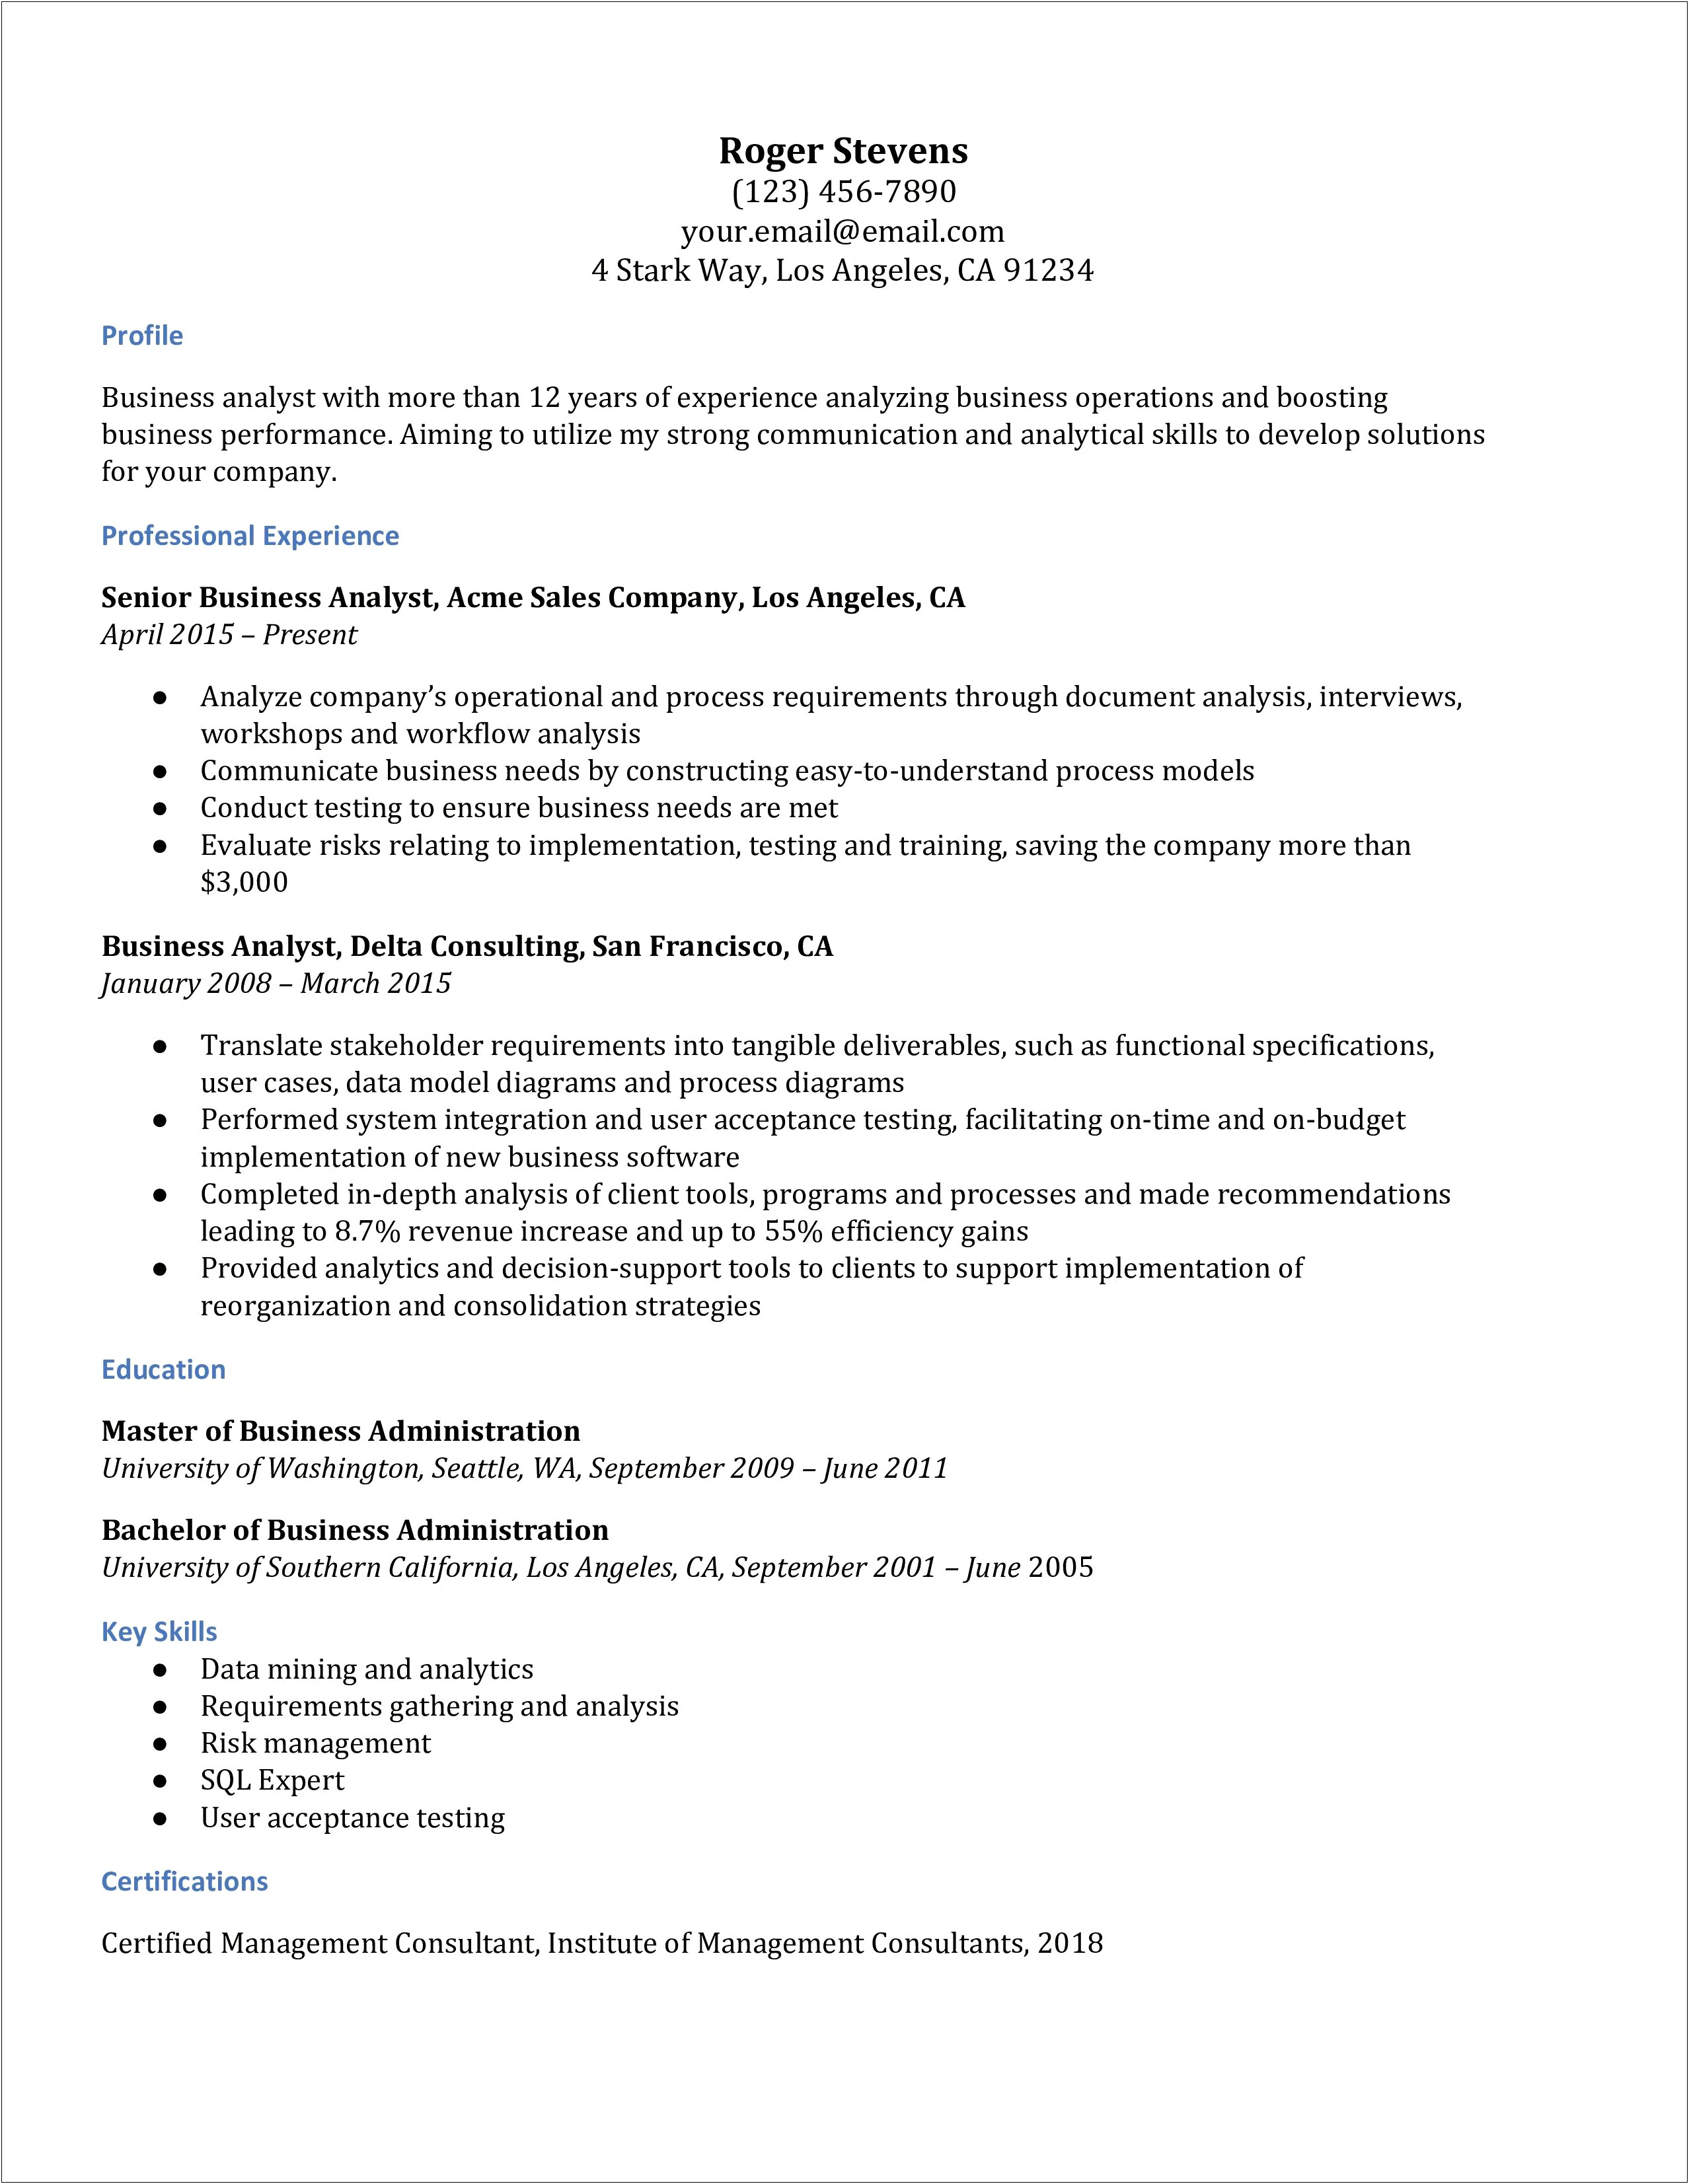 Resume Managment Consultant Analyst Entry Level